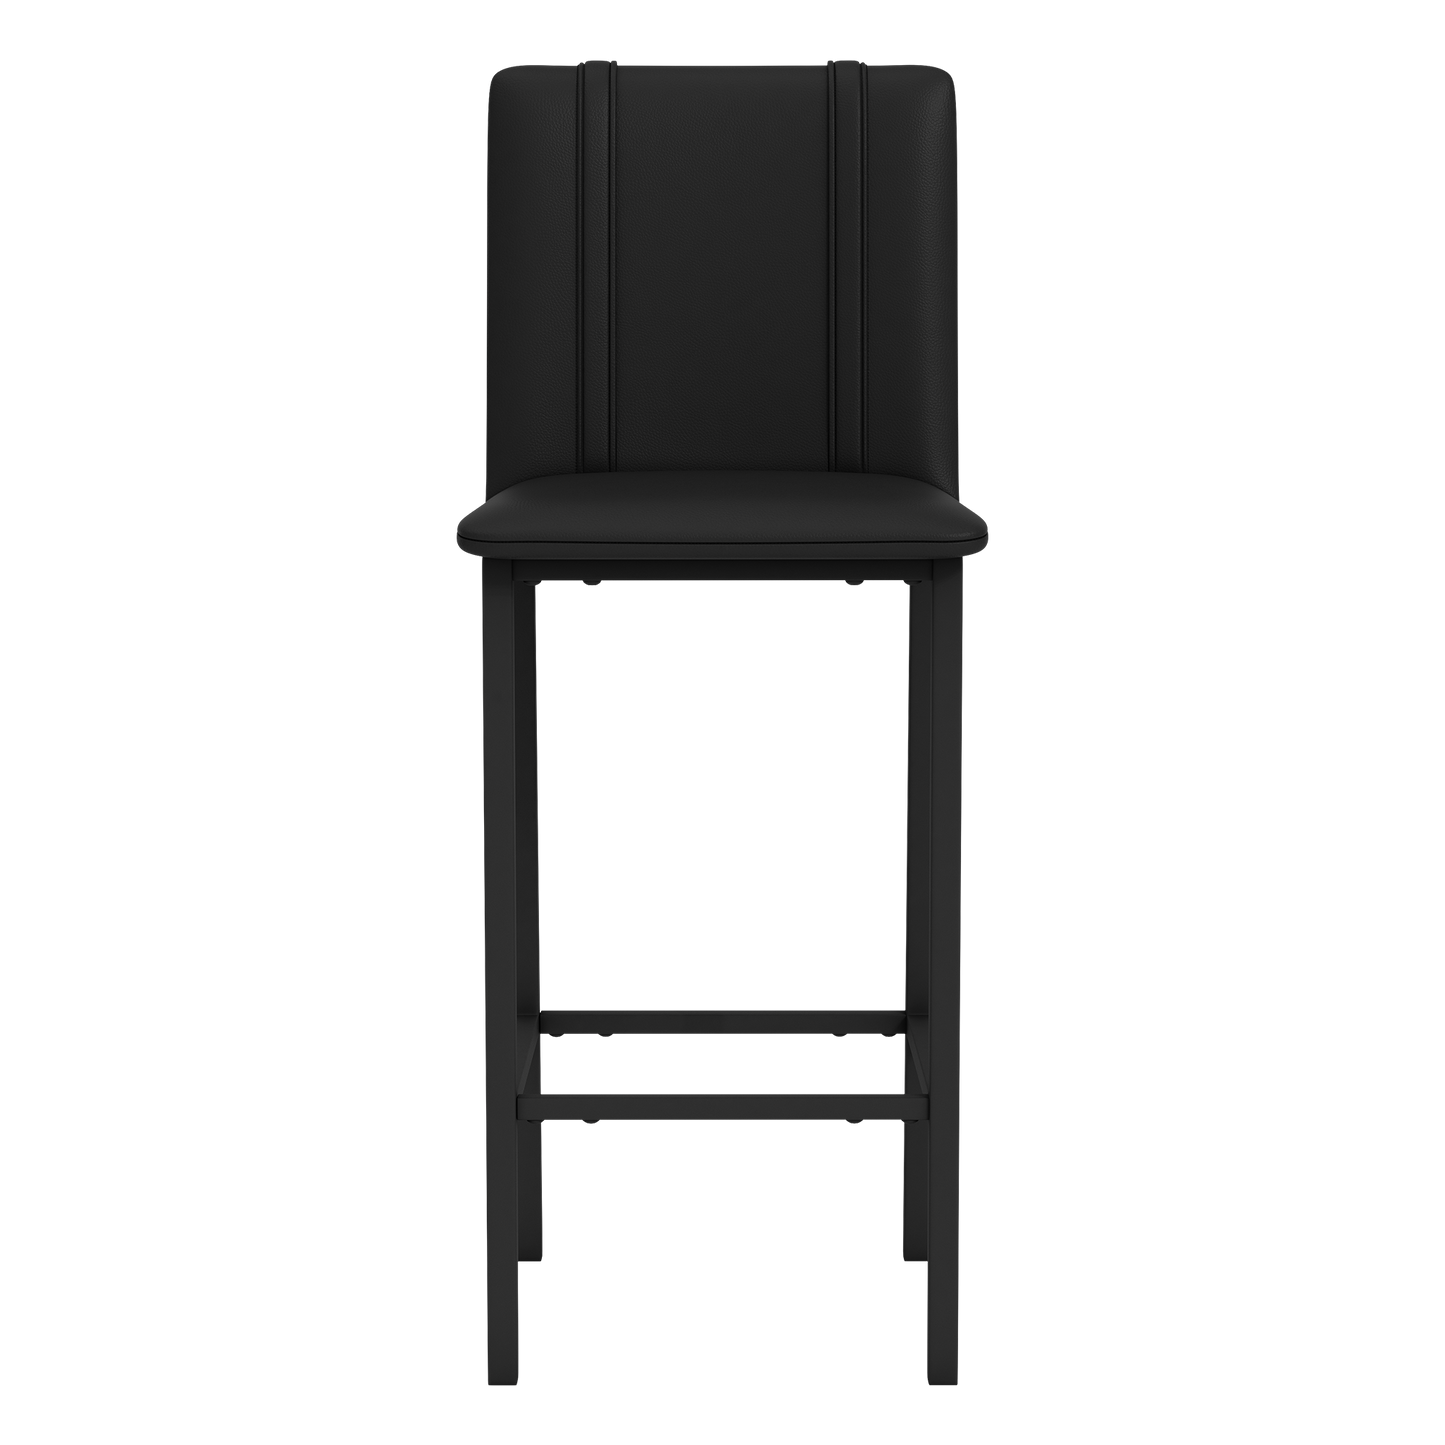 Bar Stool 500 with San Diego State Alternate Set of 2